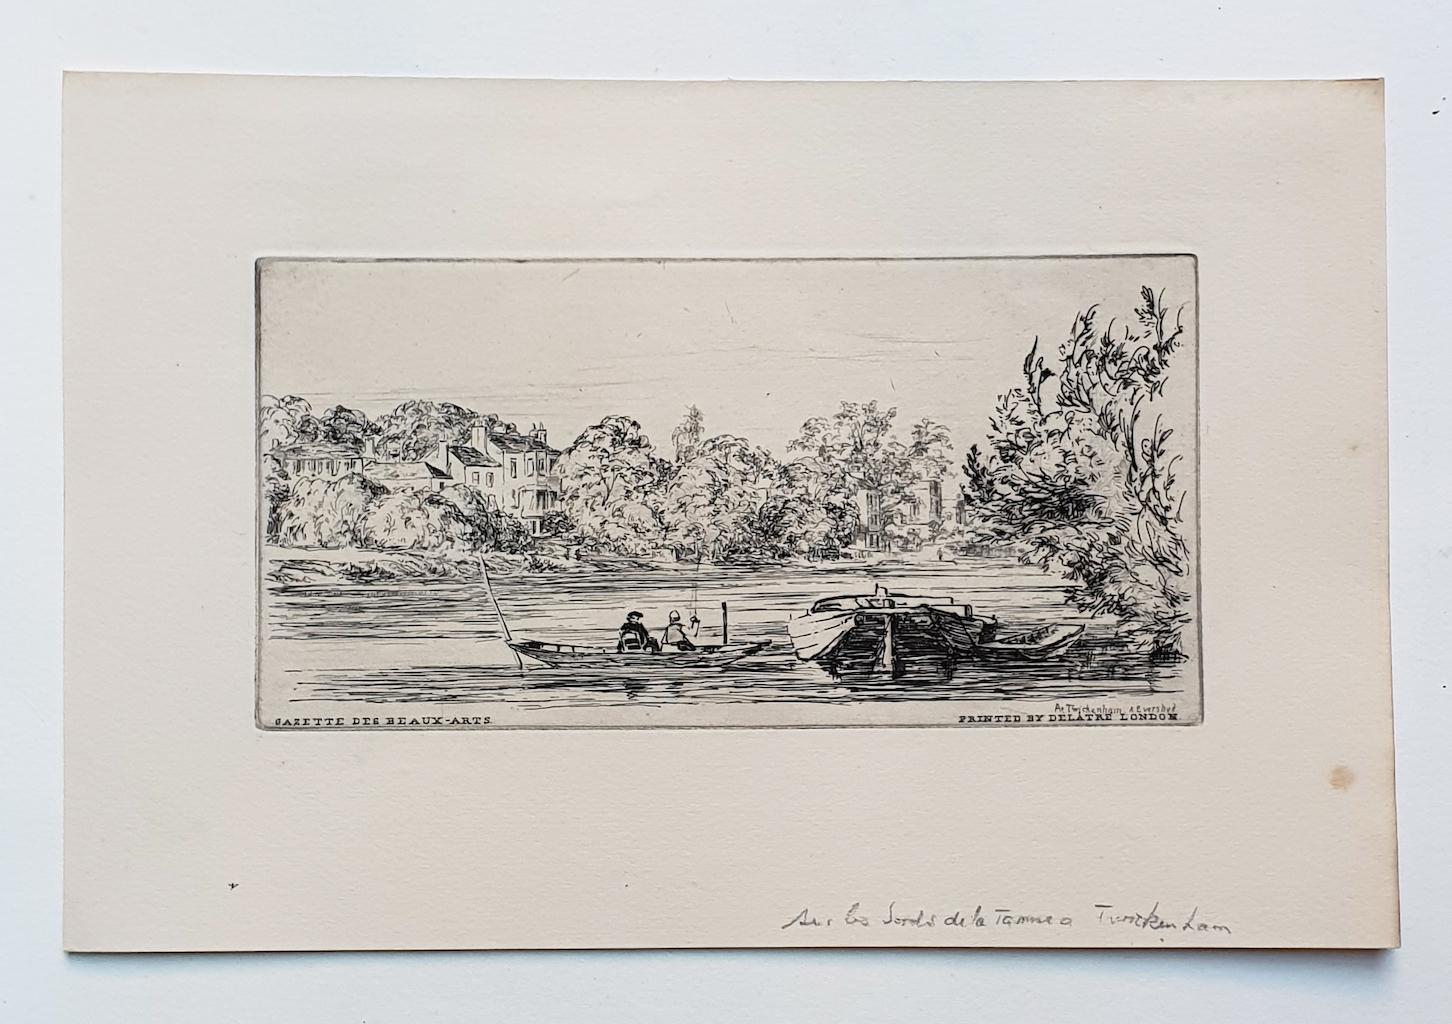 Landscape is an original etching artwork on paper realized in 1876  by Arthur Evershed (1836-1919), printed by Delatre London, hand-signed on the lower right.

The State of preservation is very good.

The artwork represents a scenery of Twickenham